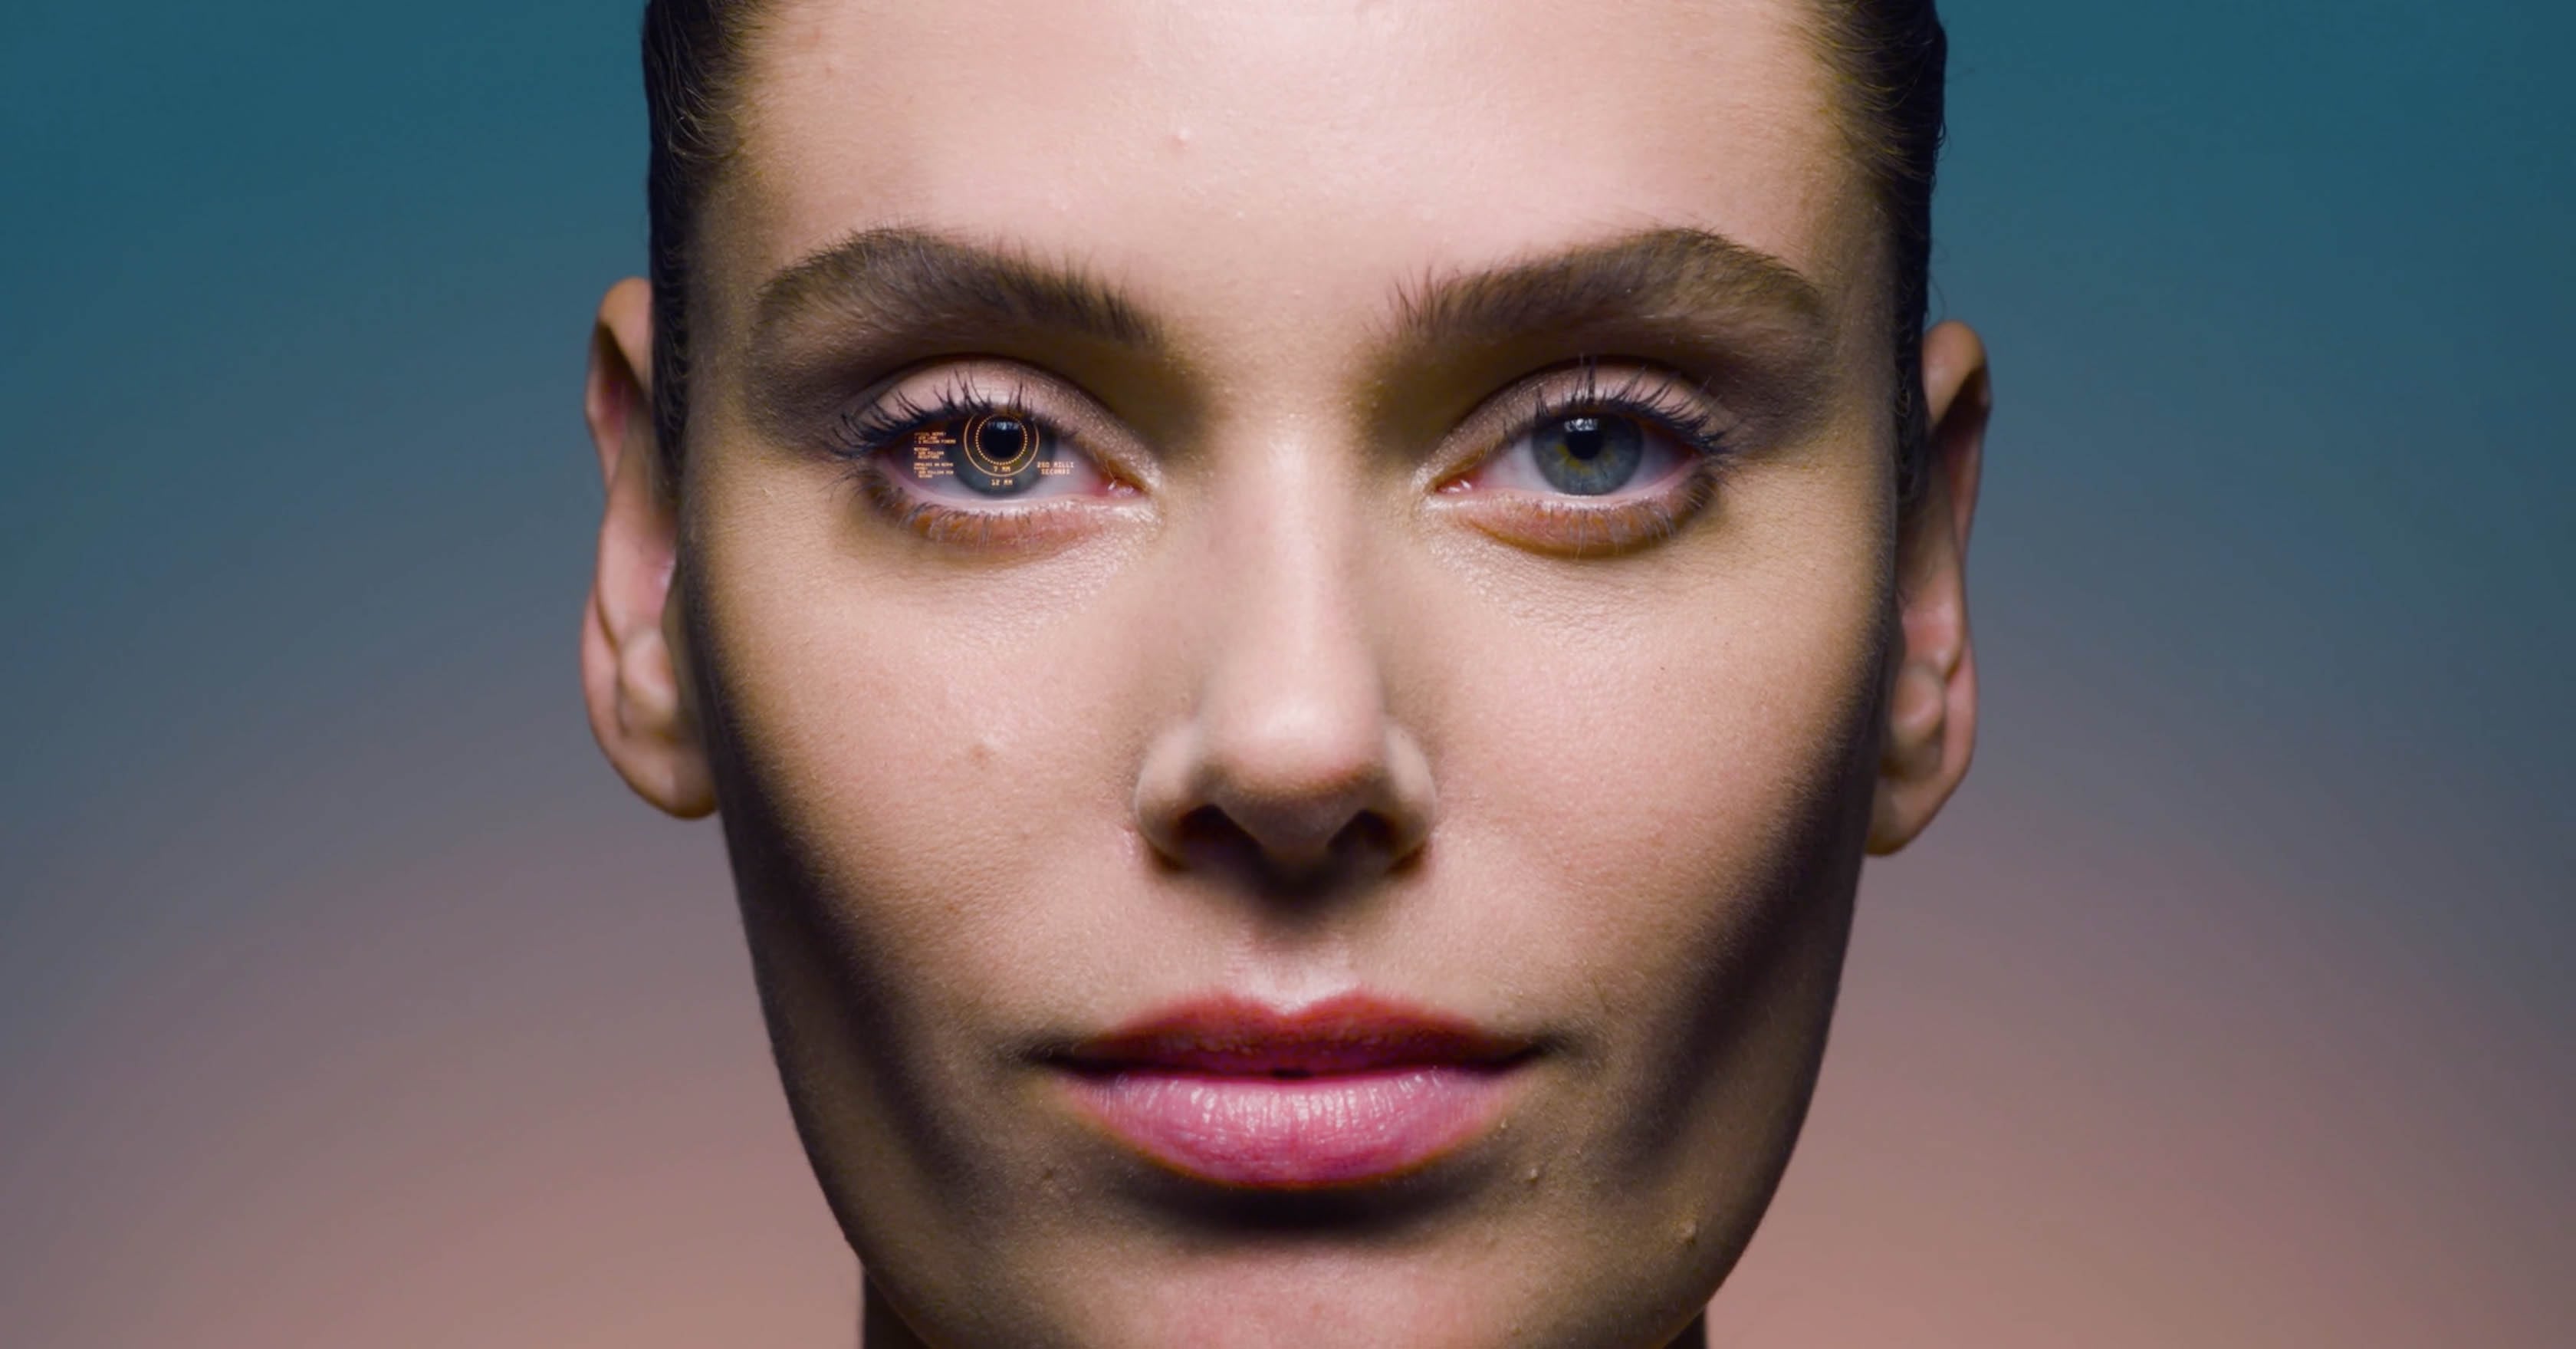 This image shows the face of a female model looking straight in the camera with a HUD on her right eye 